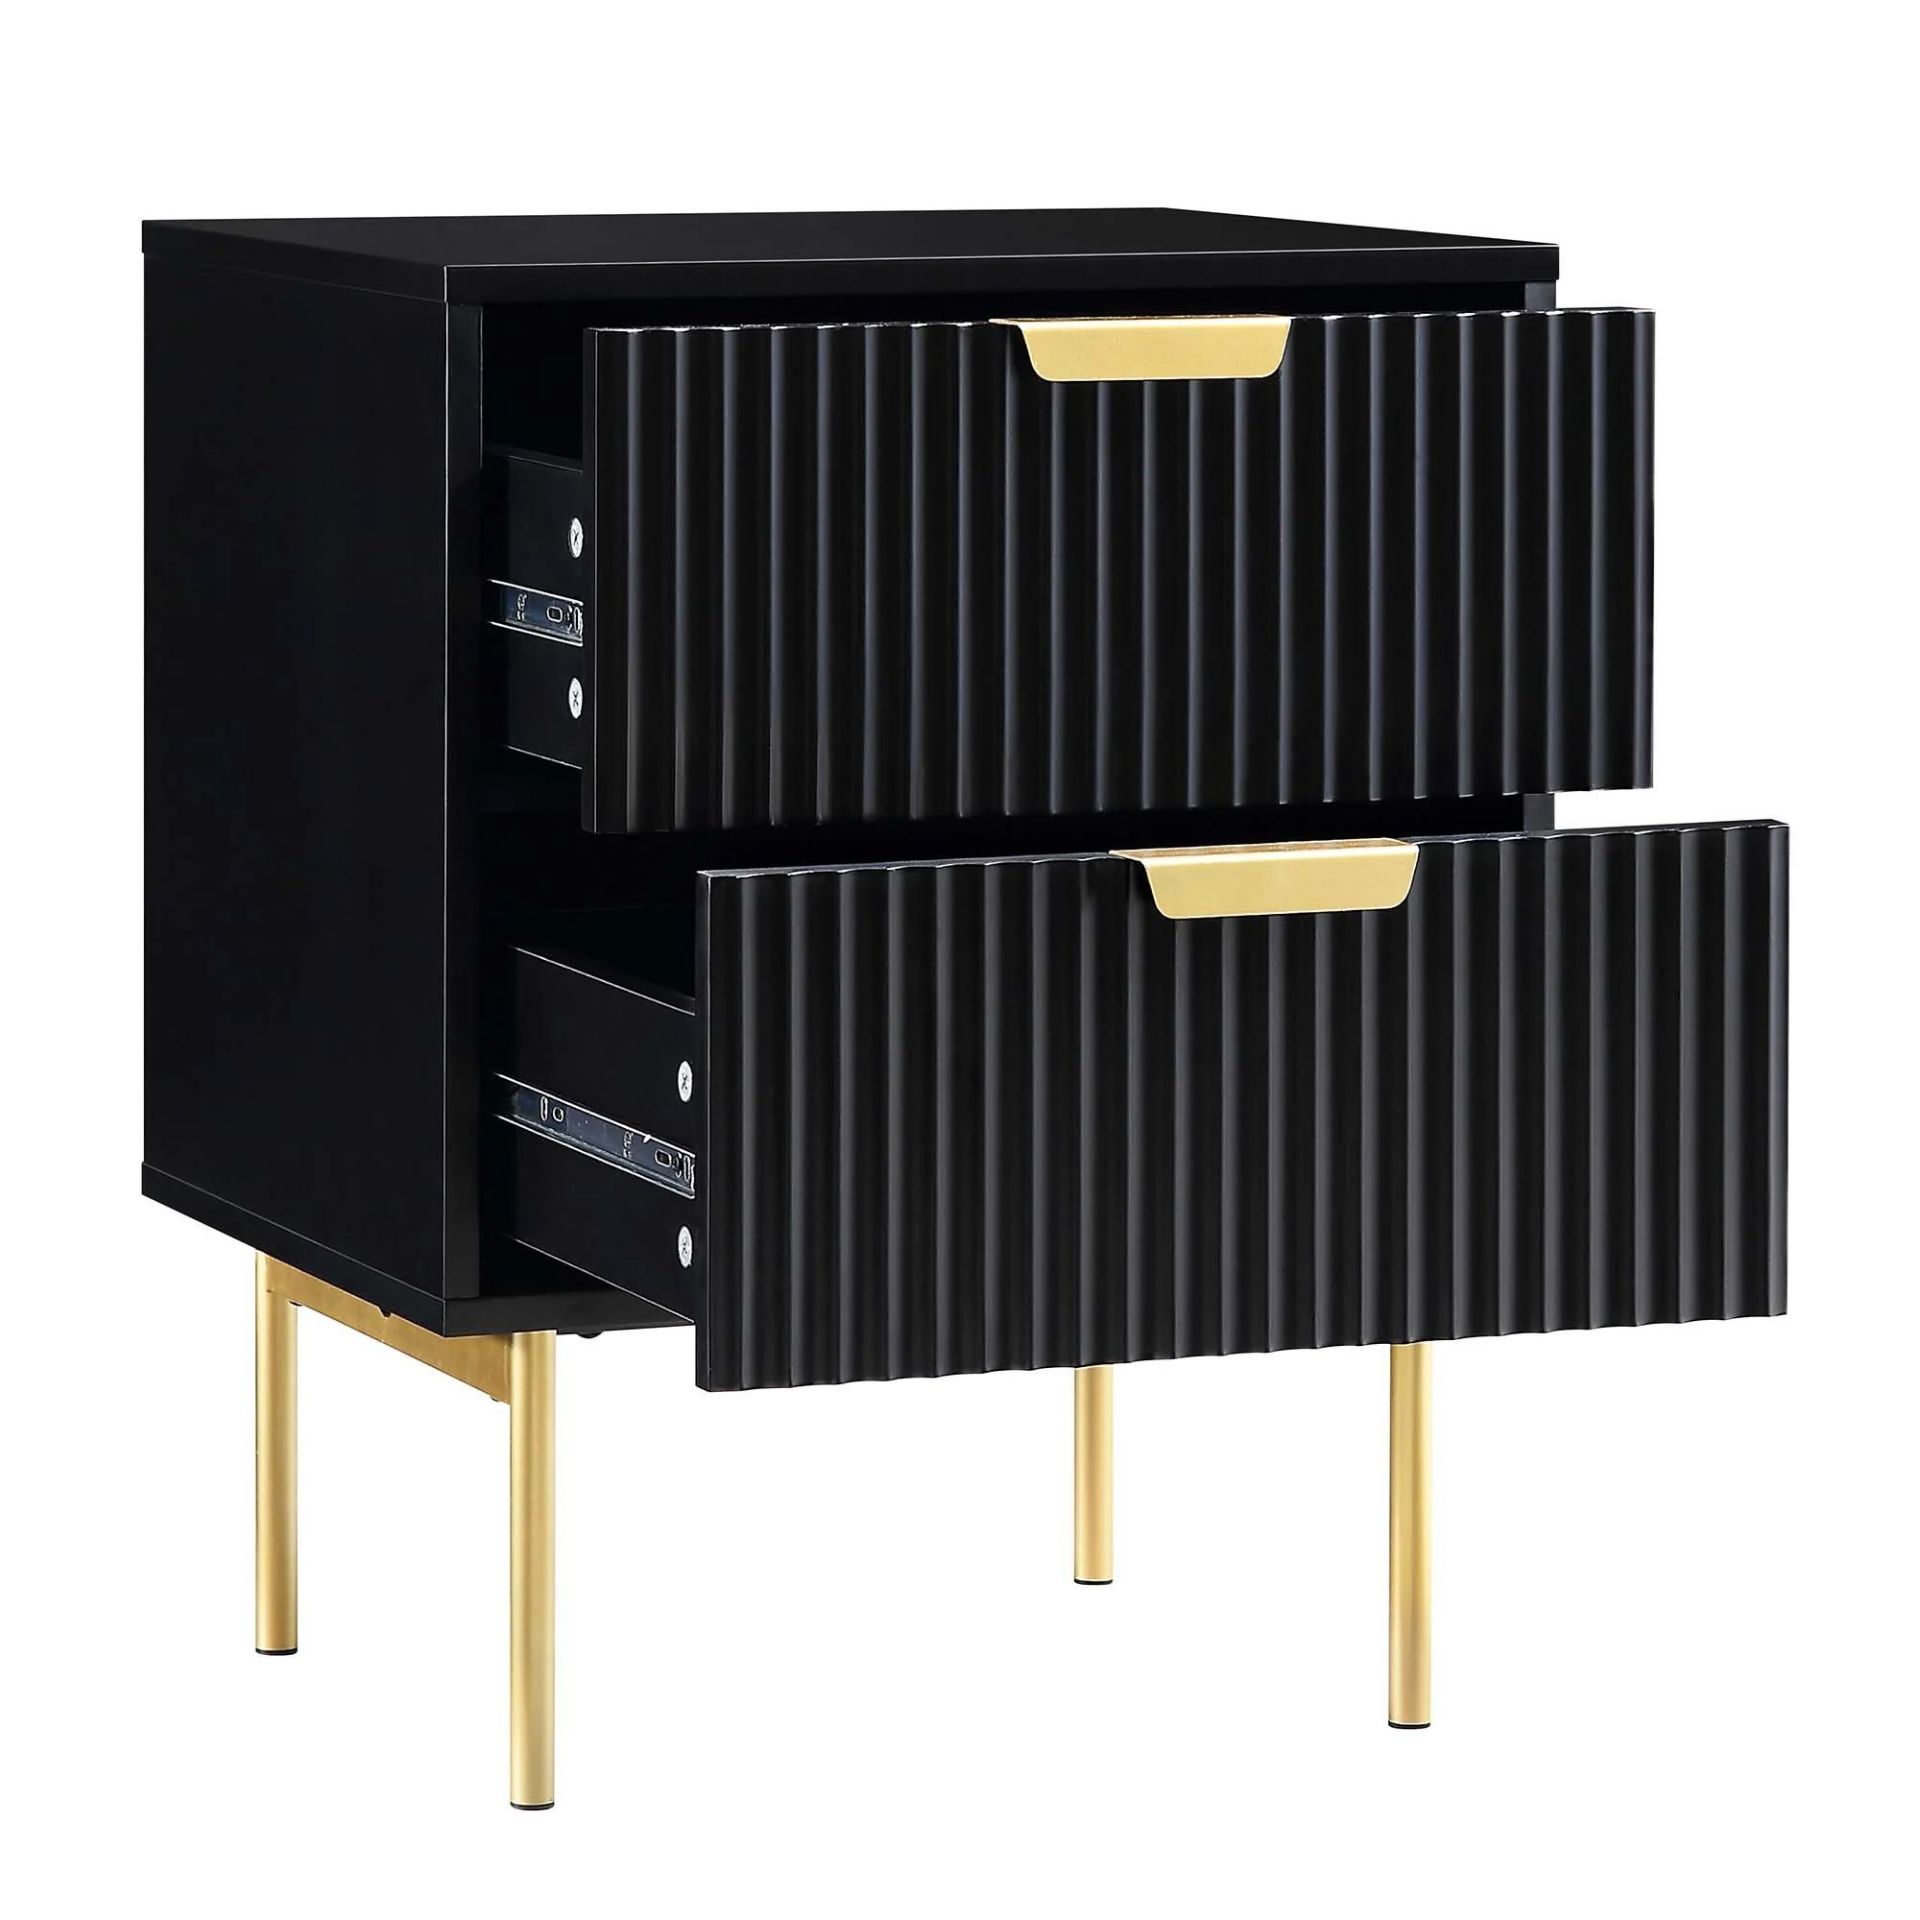 Richmond Ridged 2 Drawer Bedside Table, Matte Black. - R13.7. RRP £179.99. Our Richmond bedside - Image 2 of 4